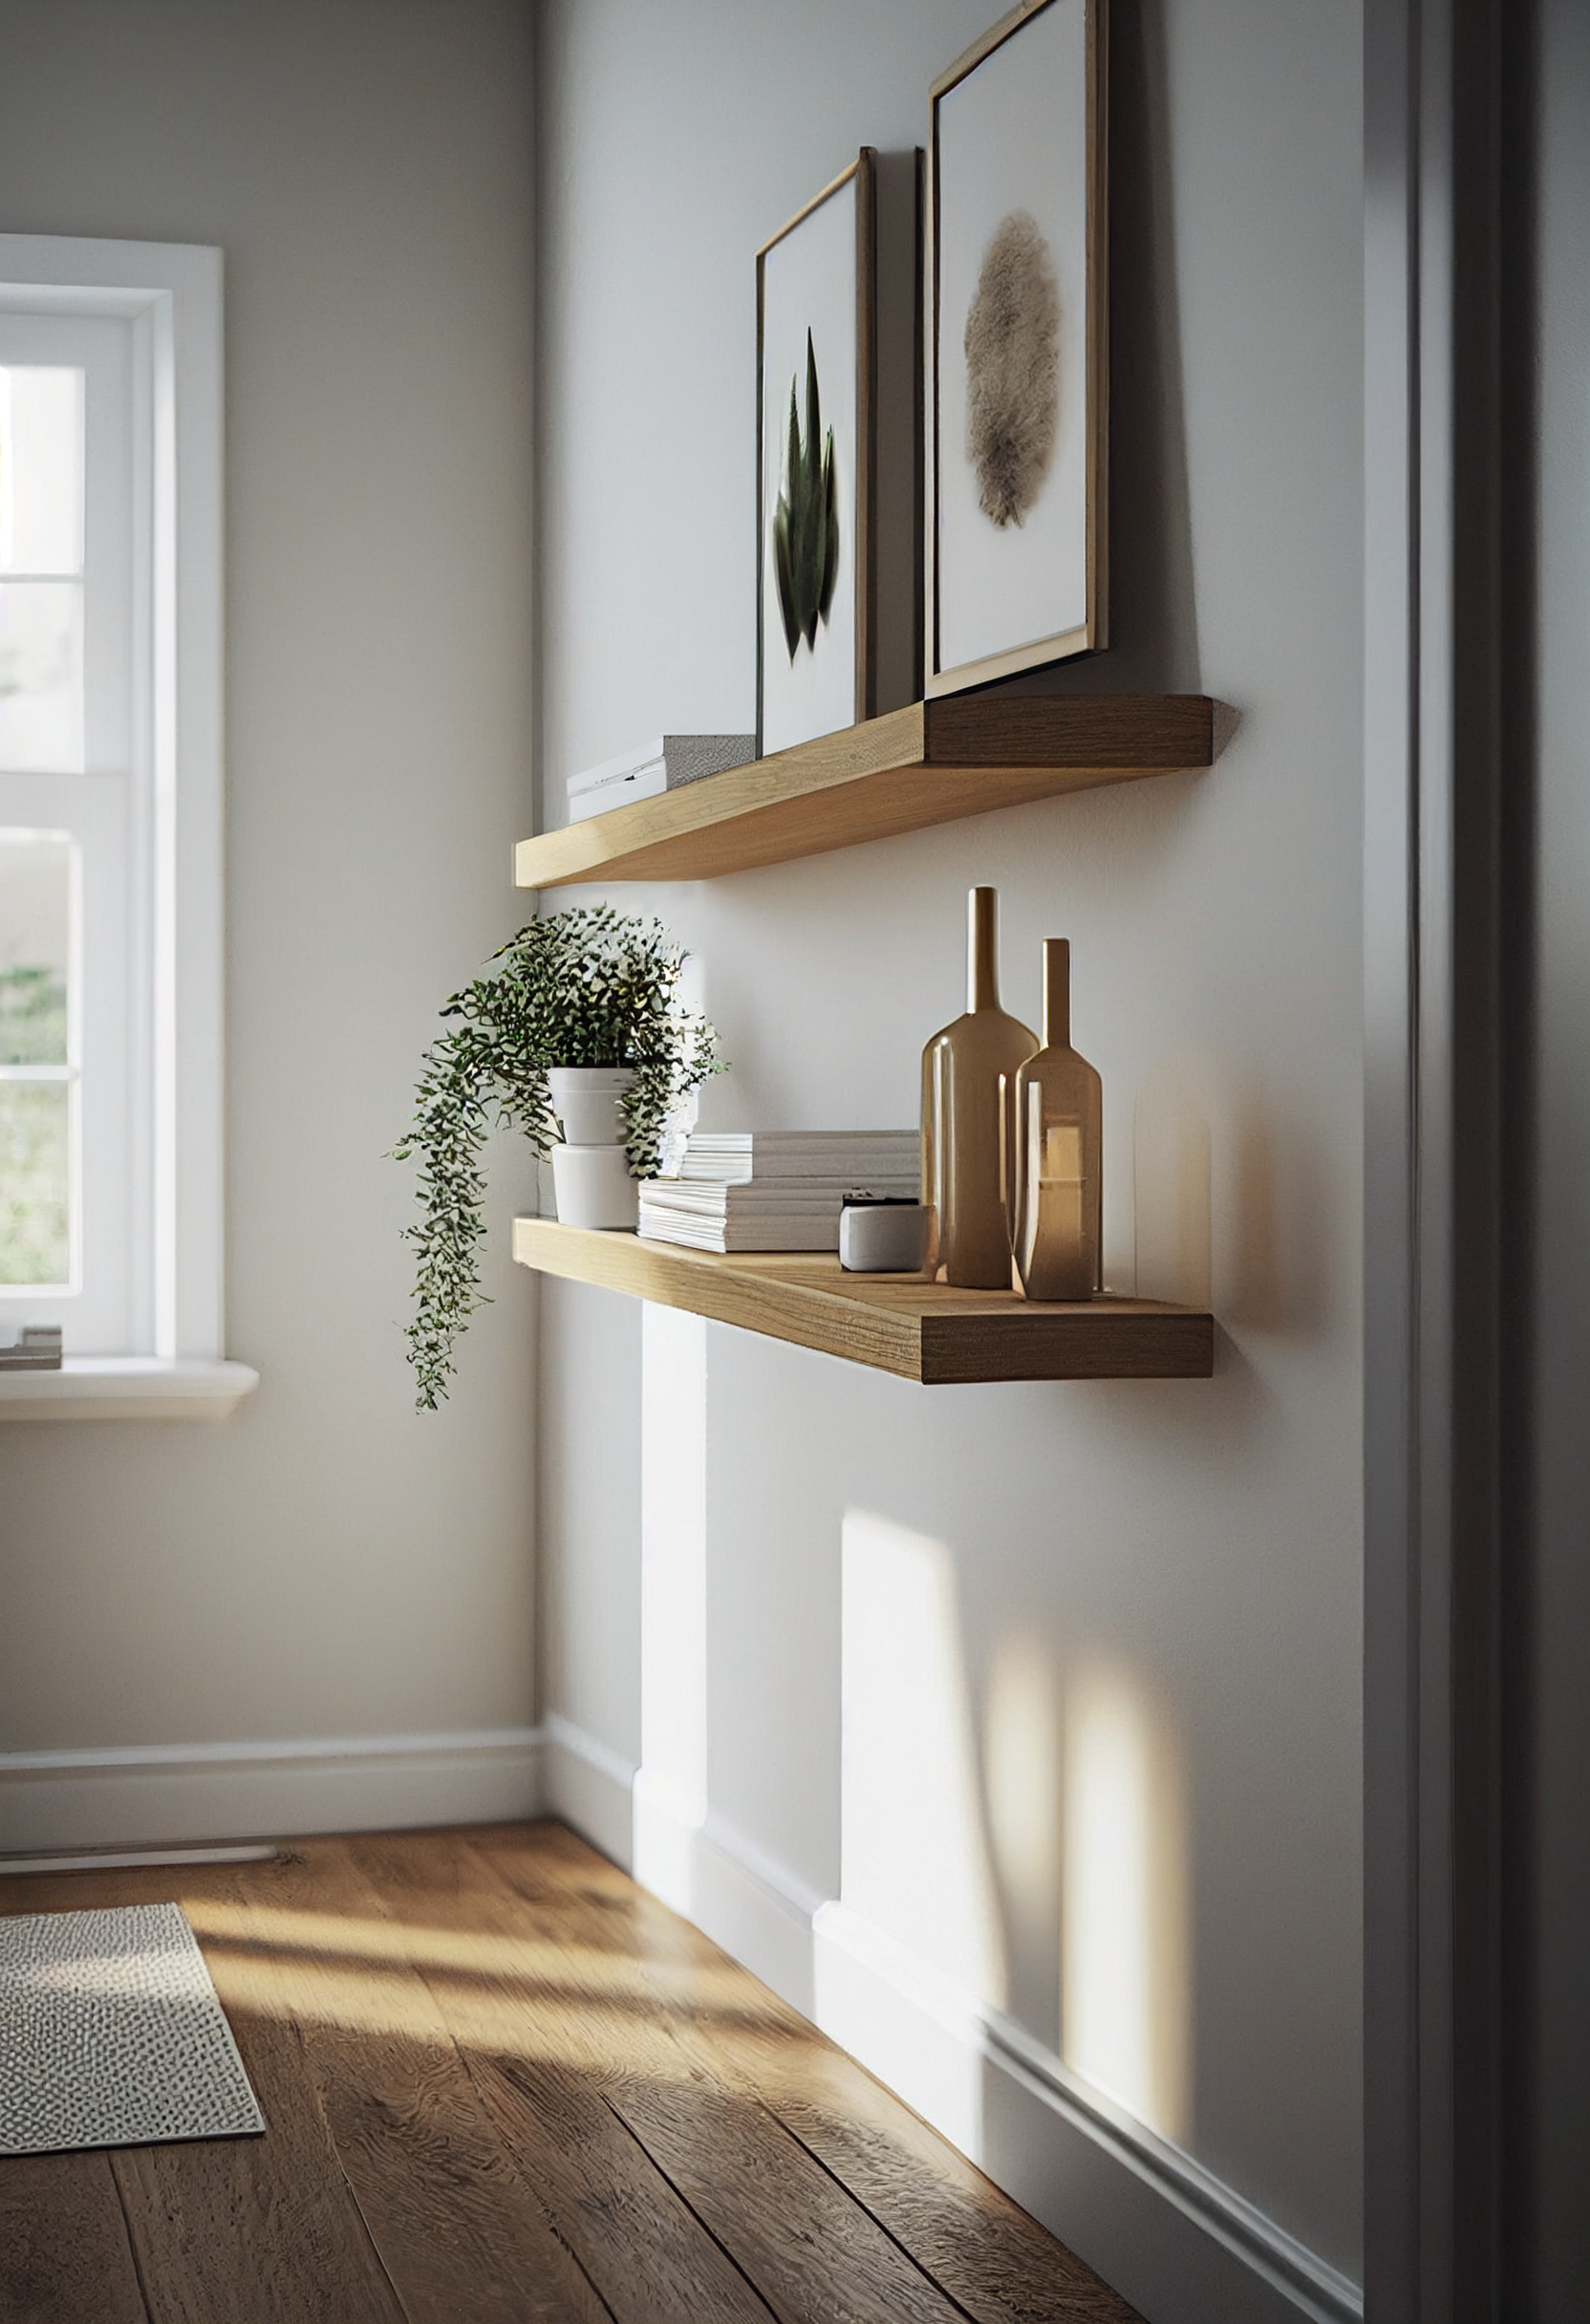 Thick floating shelves